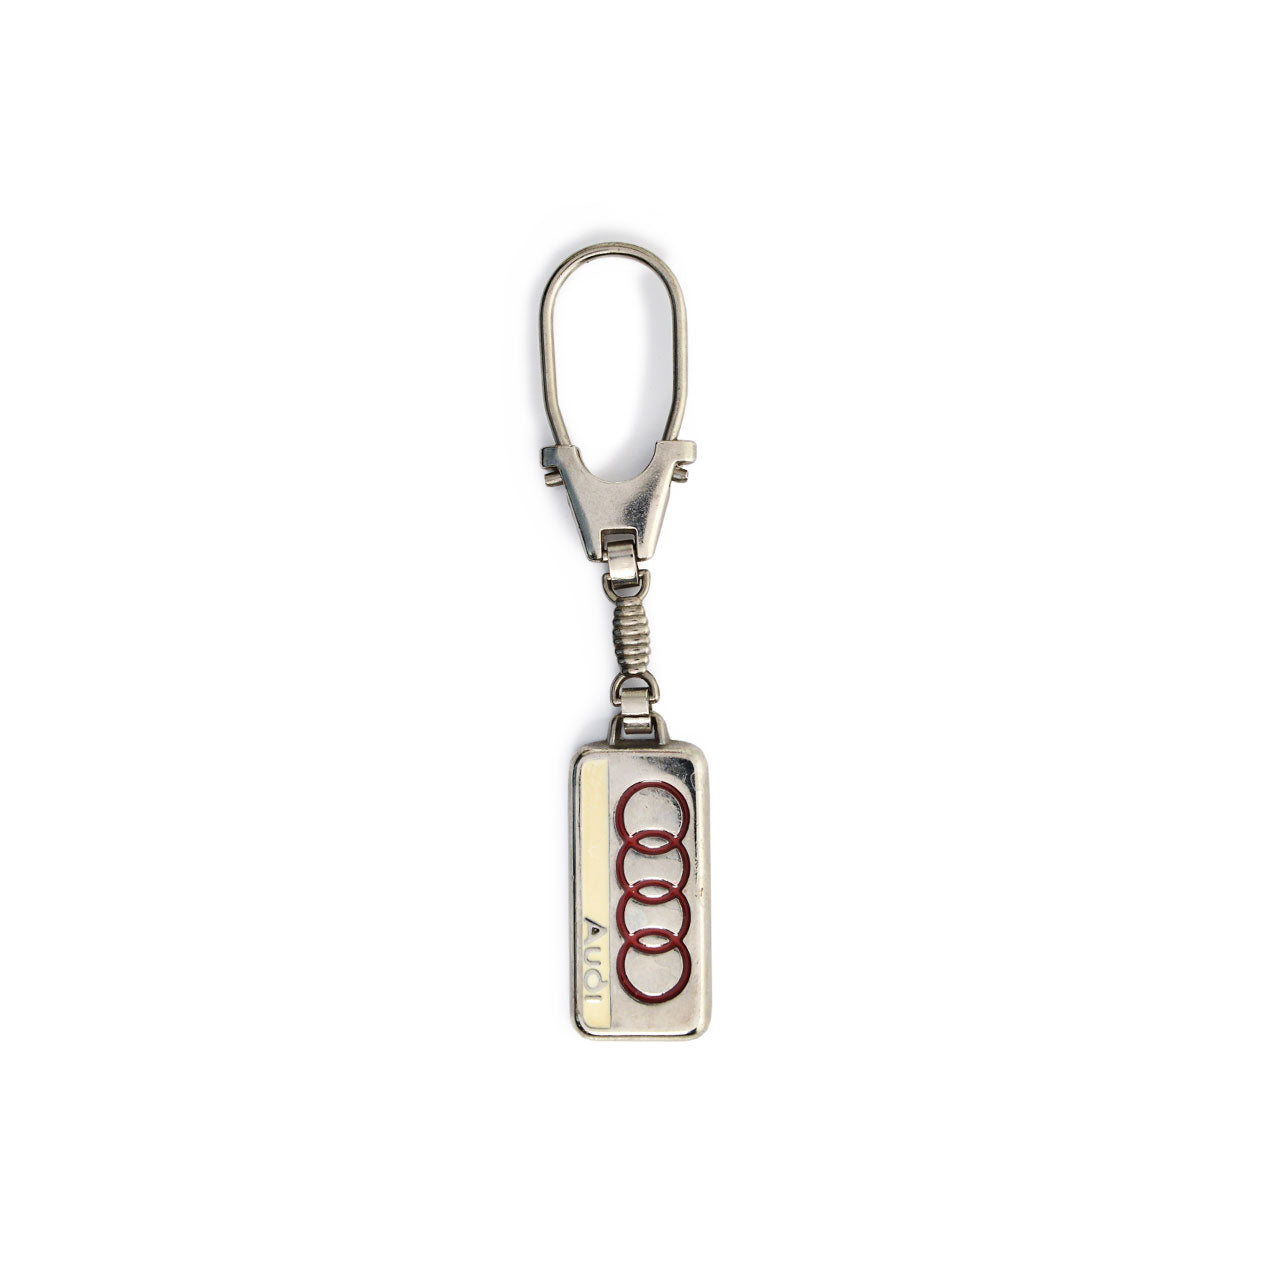 Mr. Cupps x Uncrate Vintage Audi Logotype Keychain